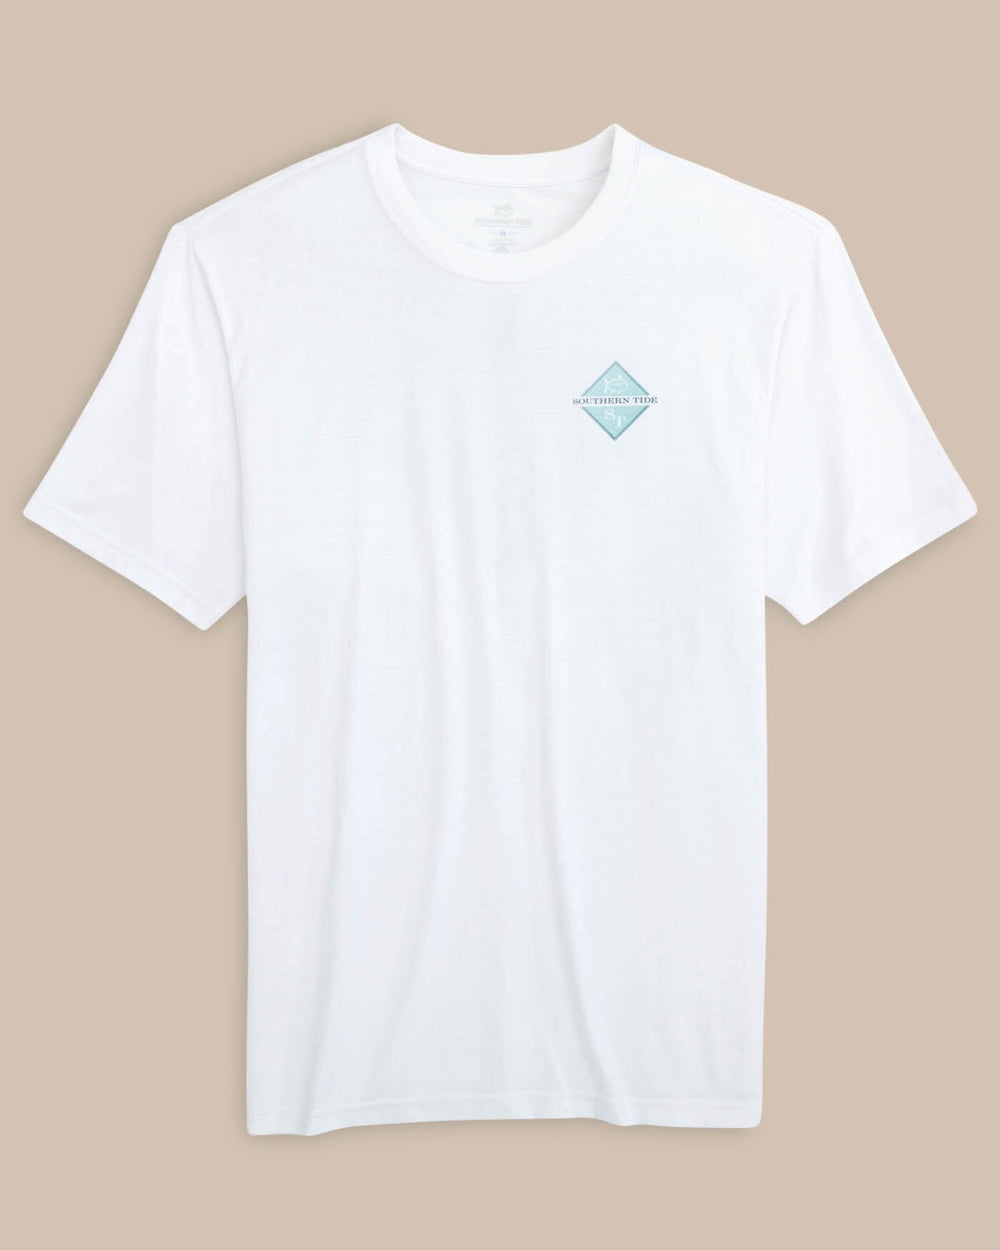 The front view of the Southern Tide Diamond Sailing Short Sleeve T-shirt by Southern Tide - Classic White